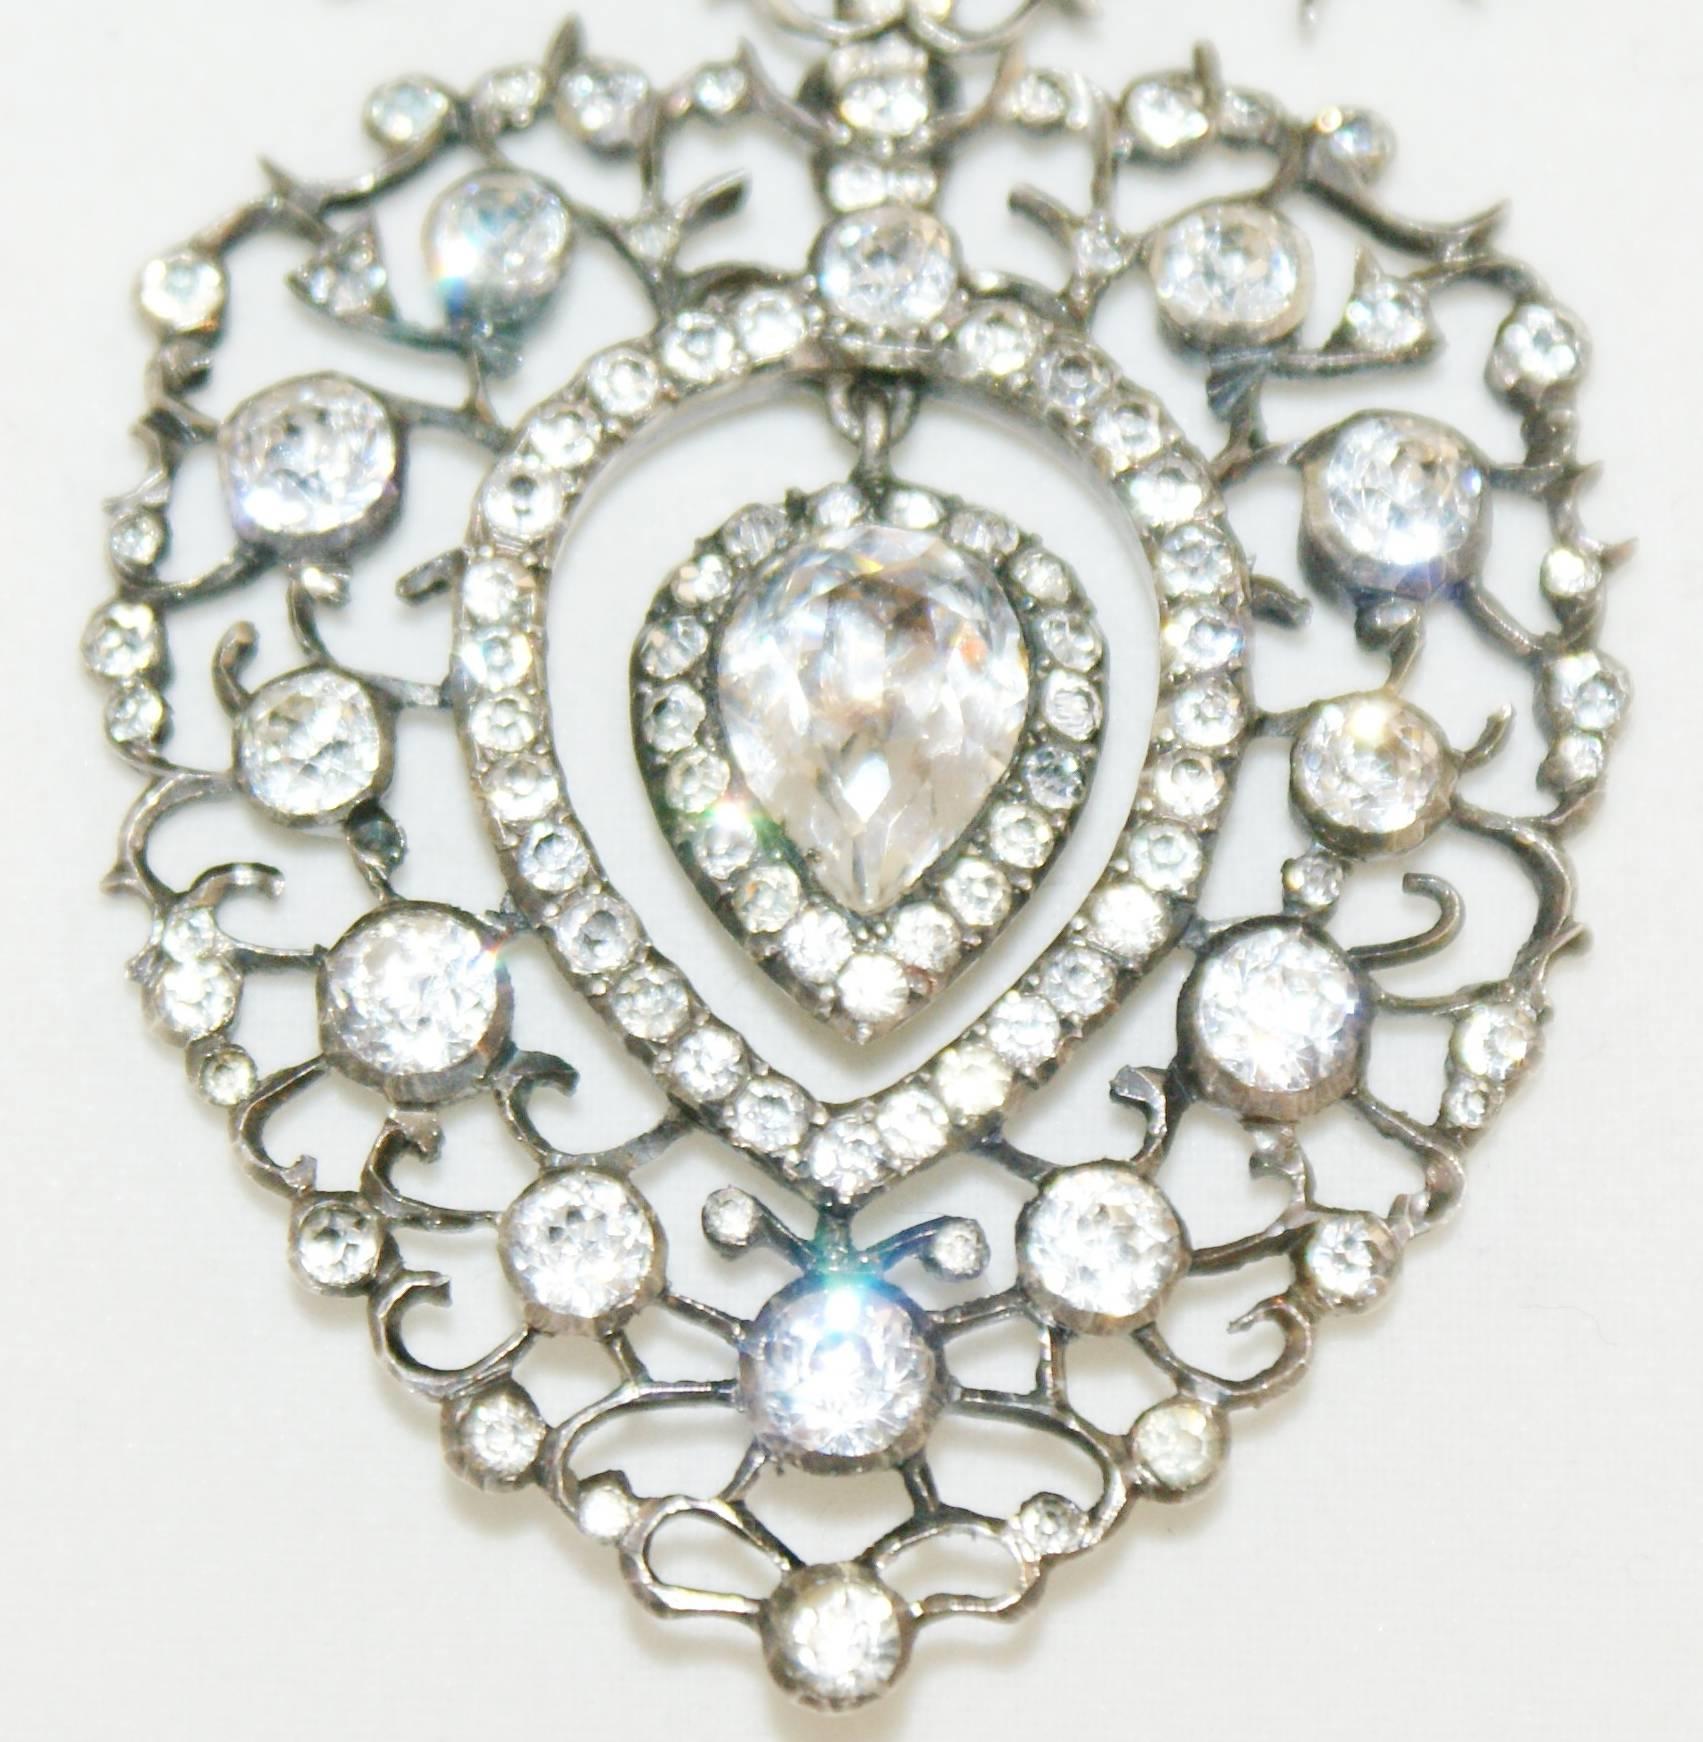 A large and bright antique Louis XVI French paste heart shaped pendant, set in silver. France circa 1780.
The articulated heart pendant is surrounded by a halo and it is suspended from a stylised (descending) dove motif .
It most probably represents